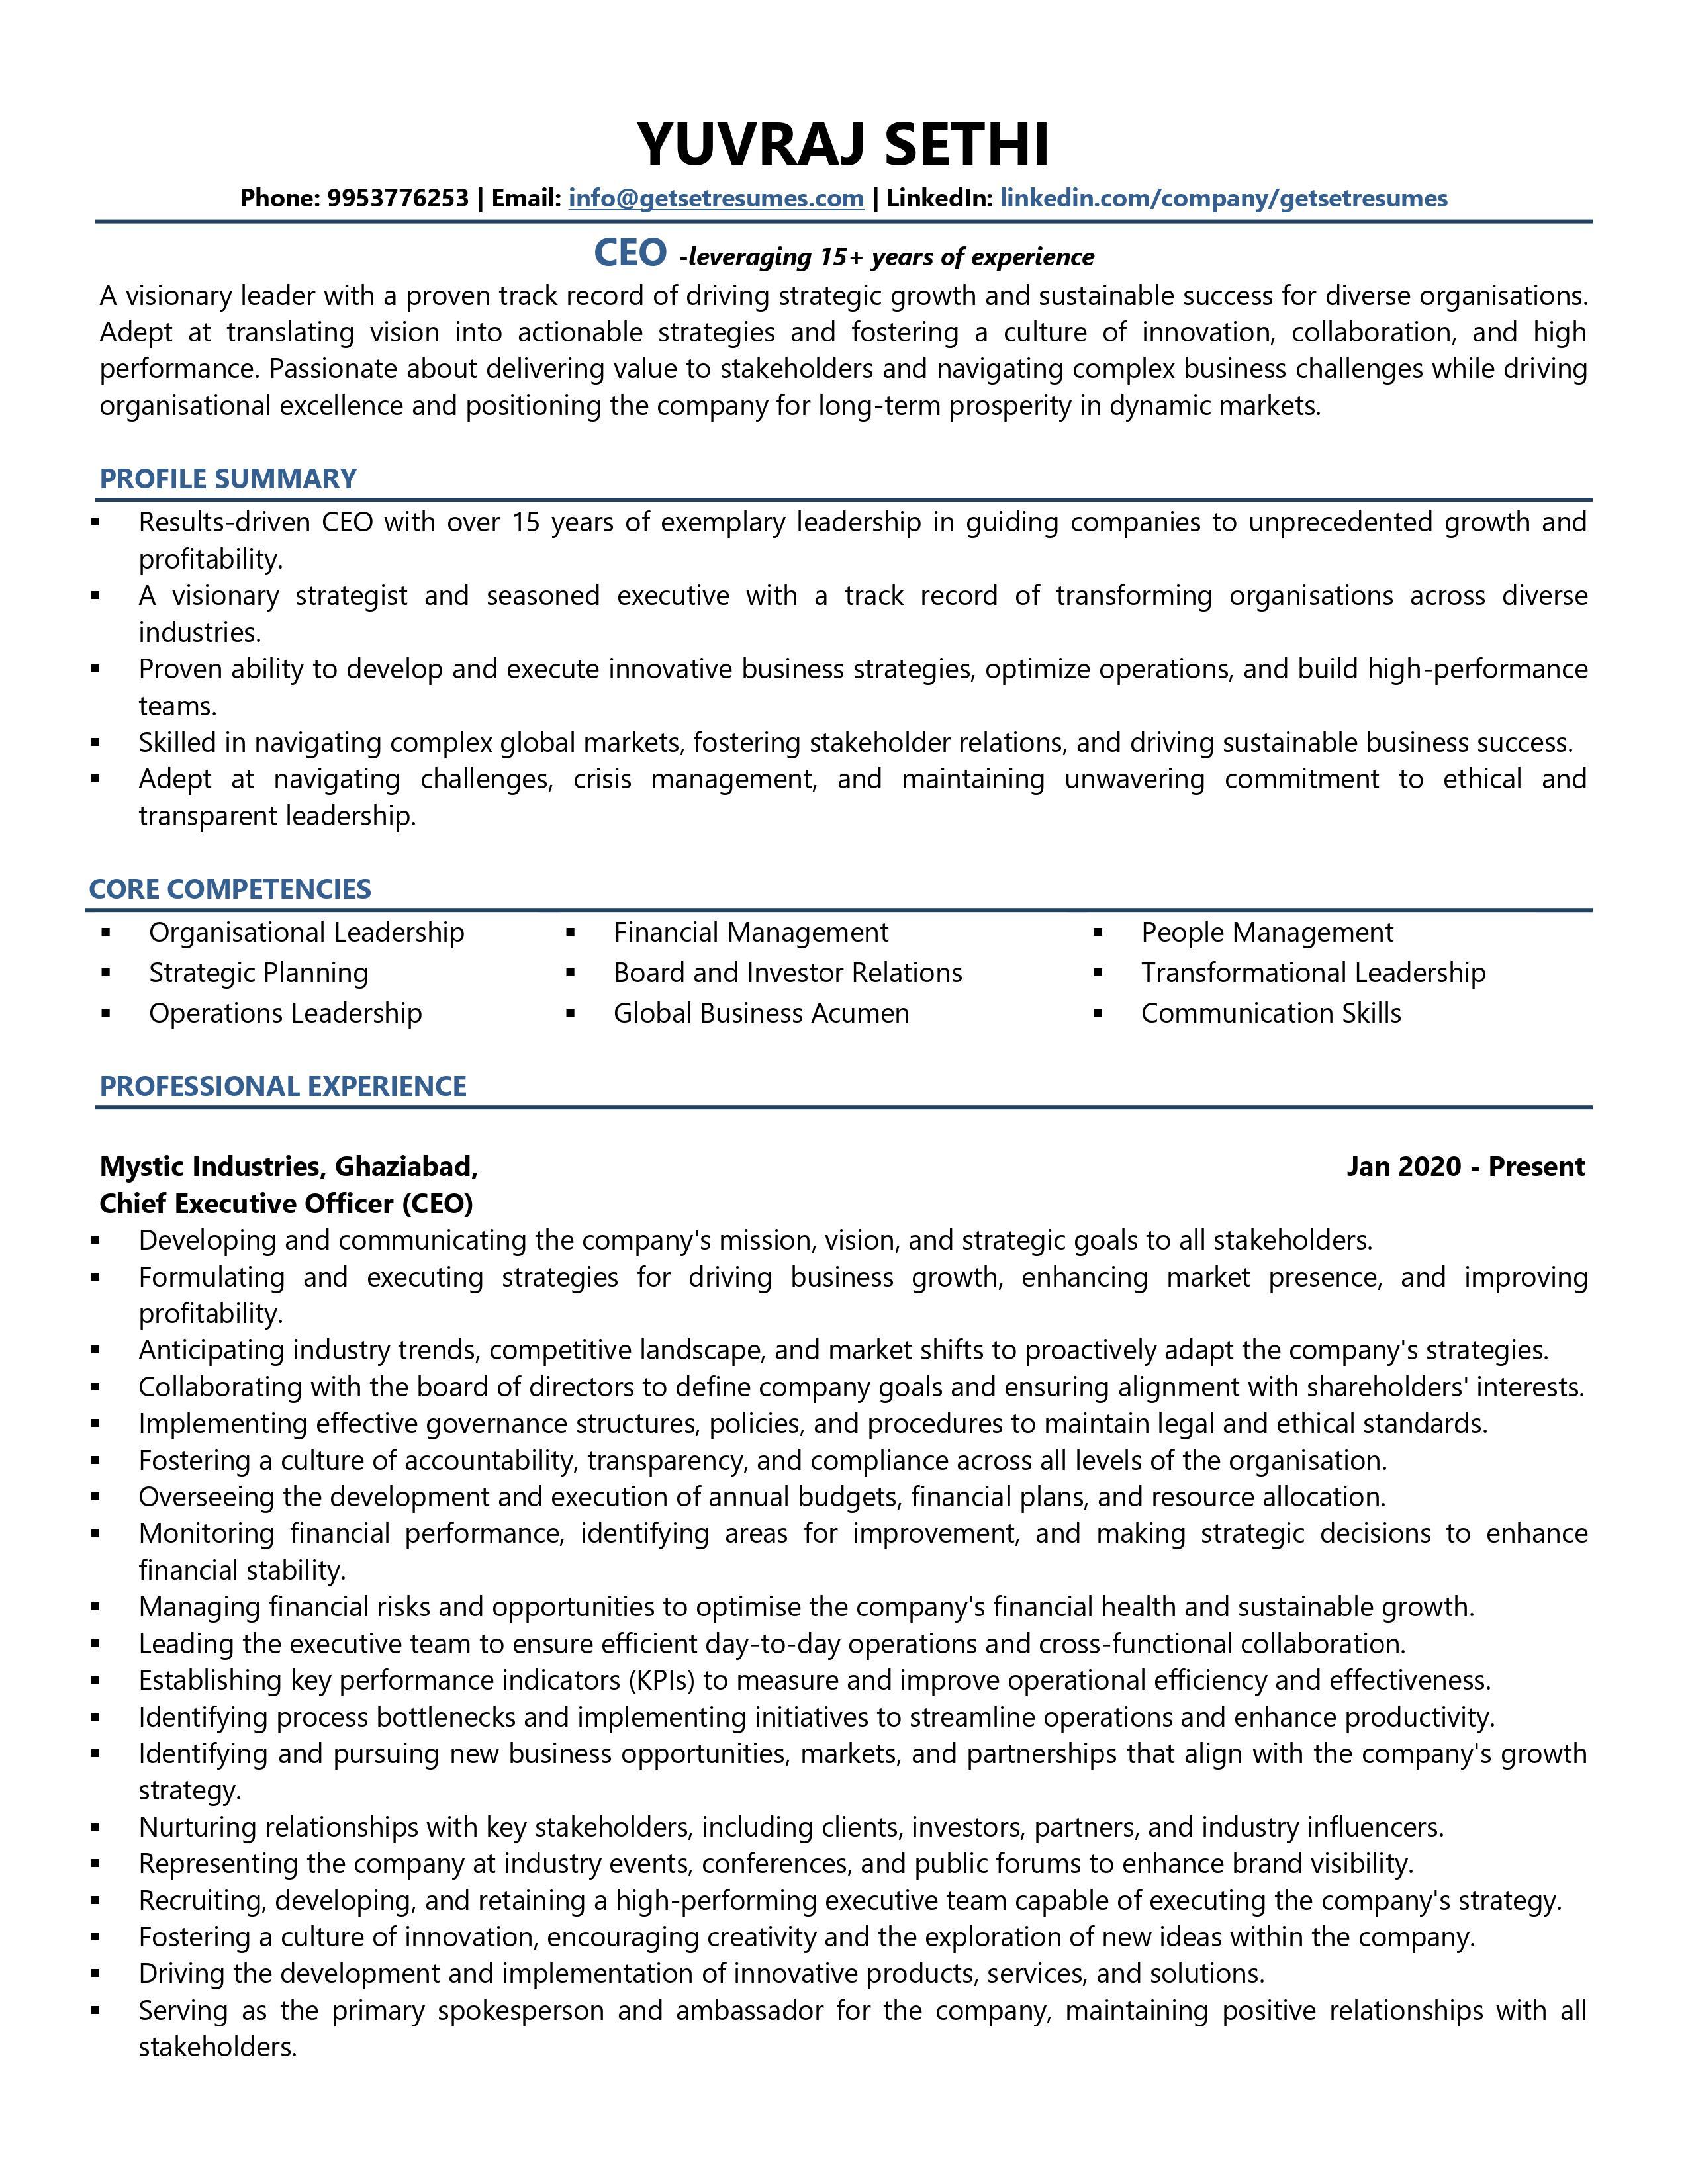 Chief Executive Officer (CEO) - Resume Example & Template